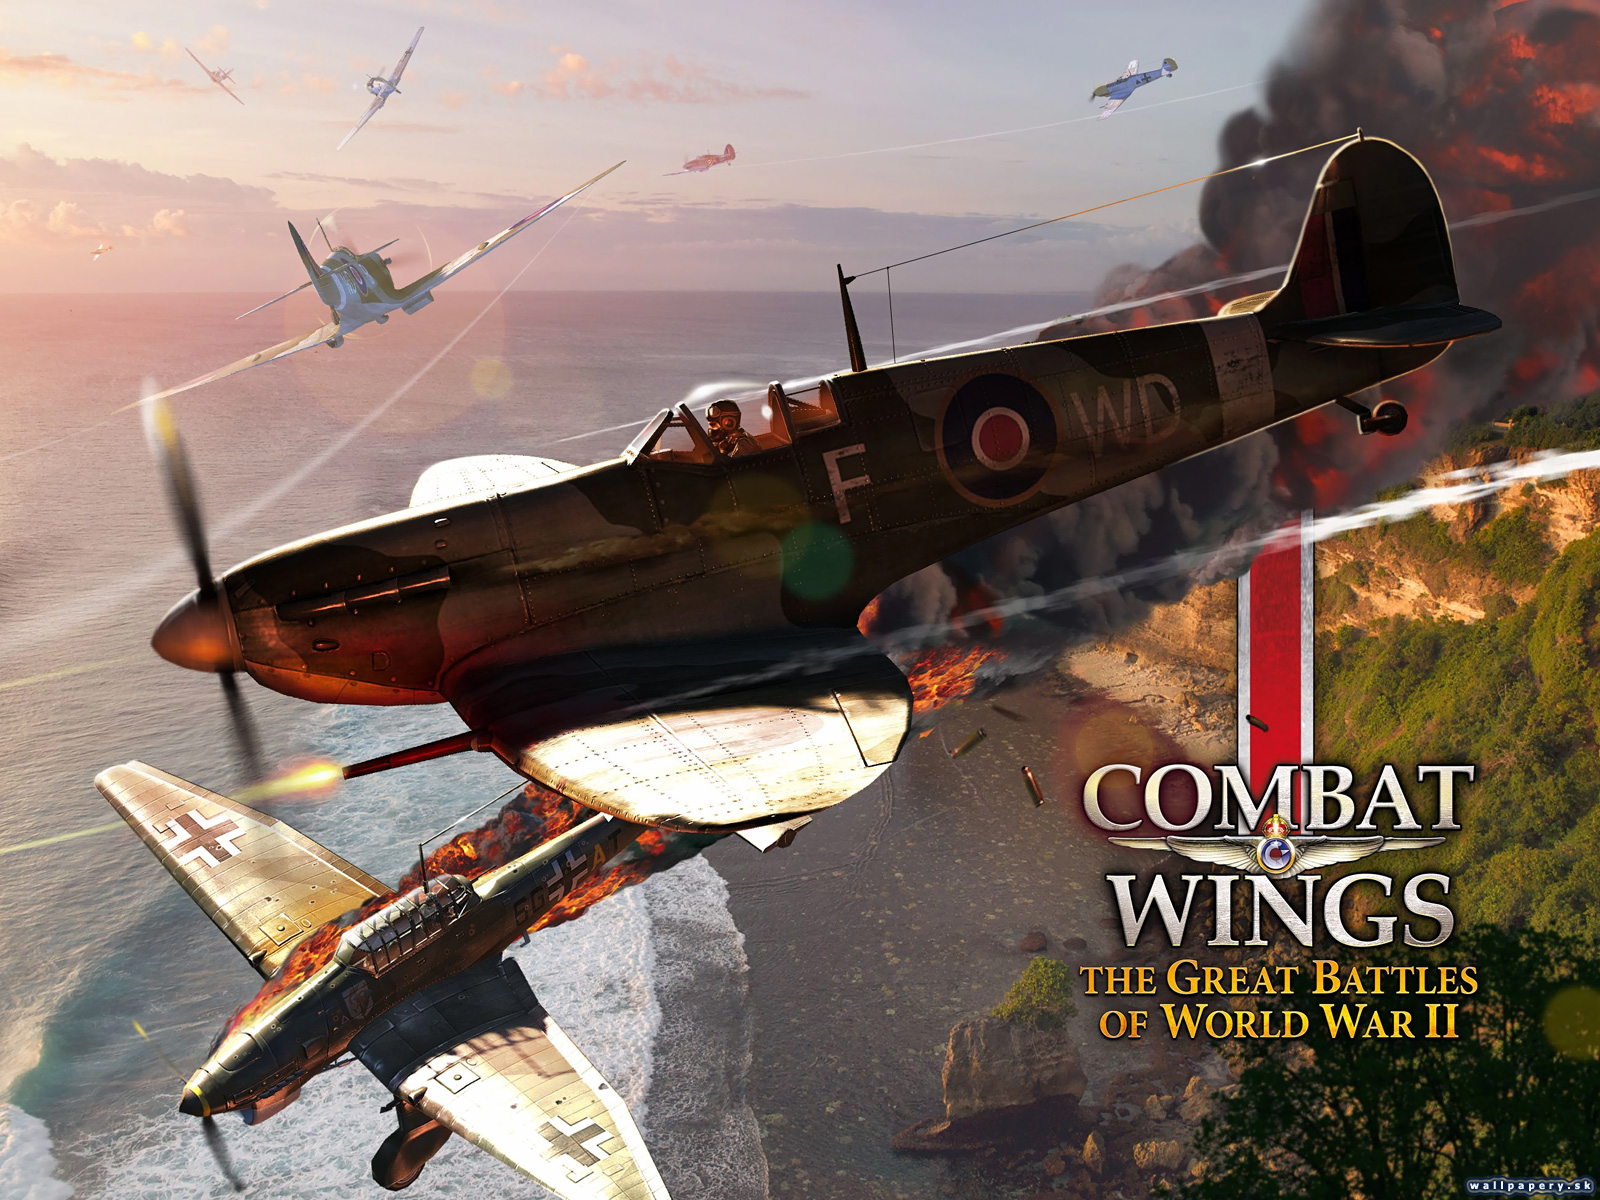 Combat Wings: The Great Battles of WWII - wallpaper 2